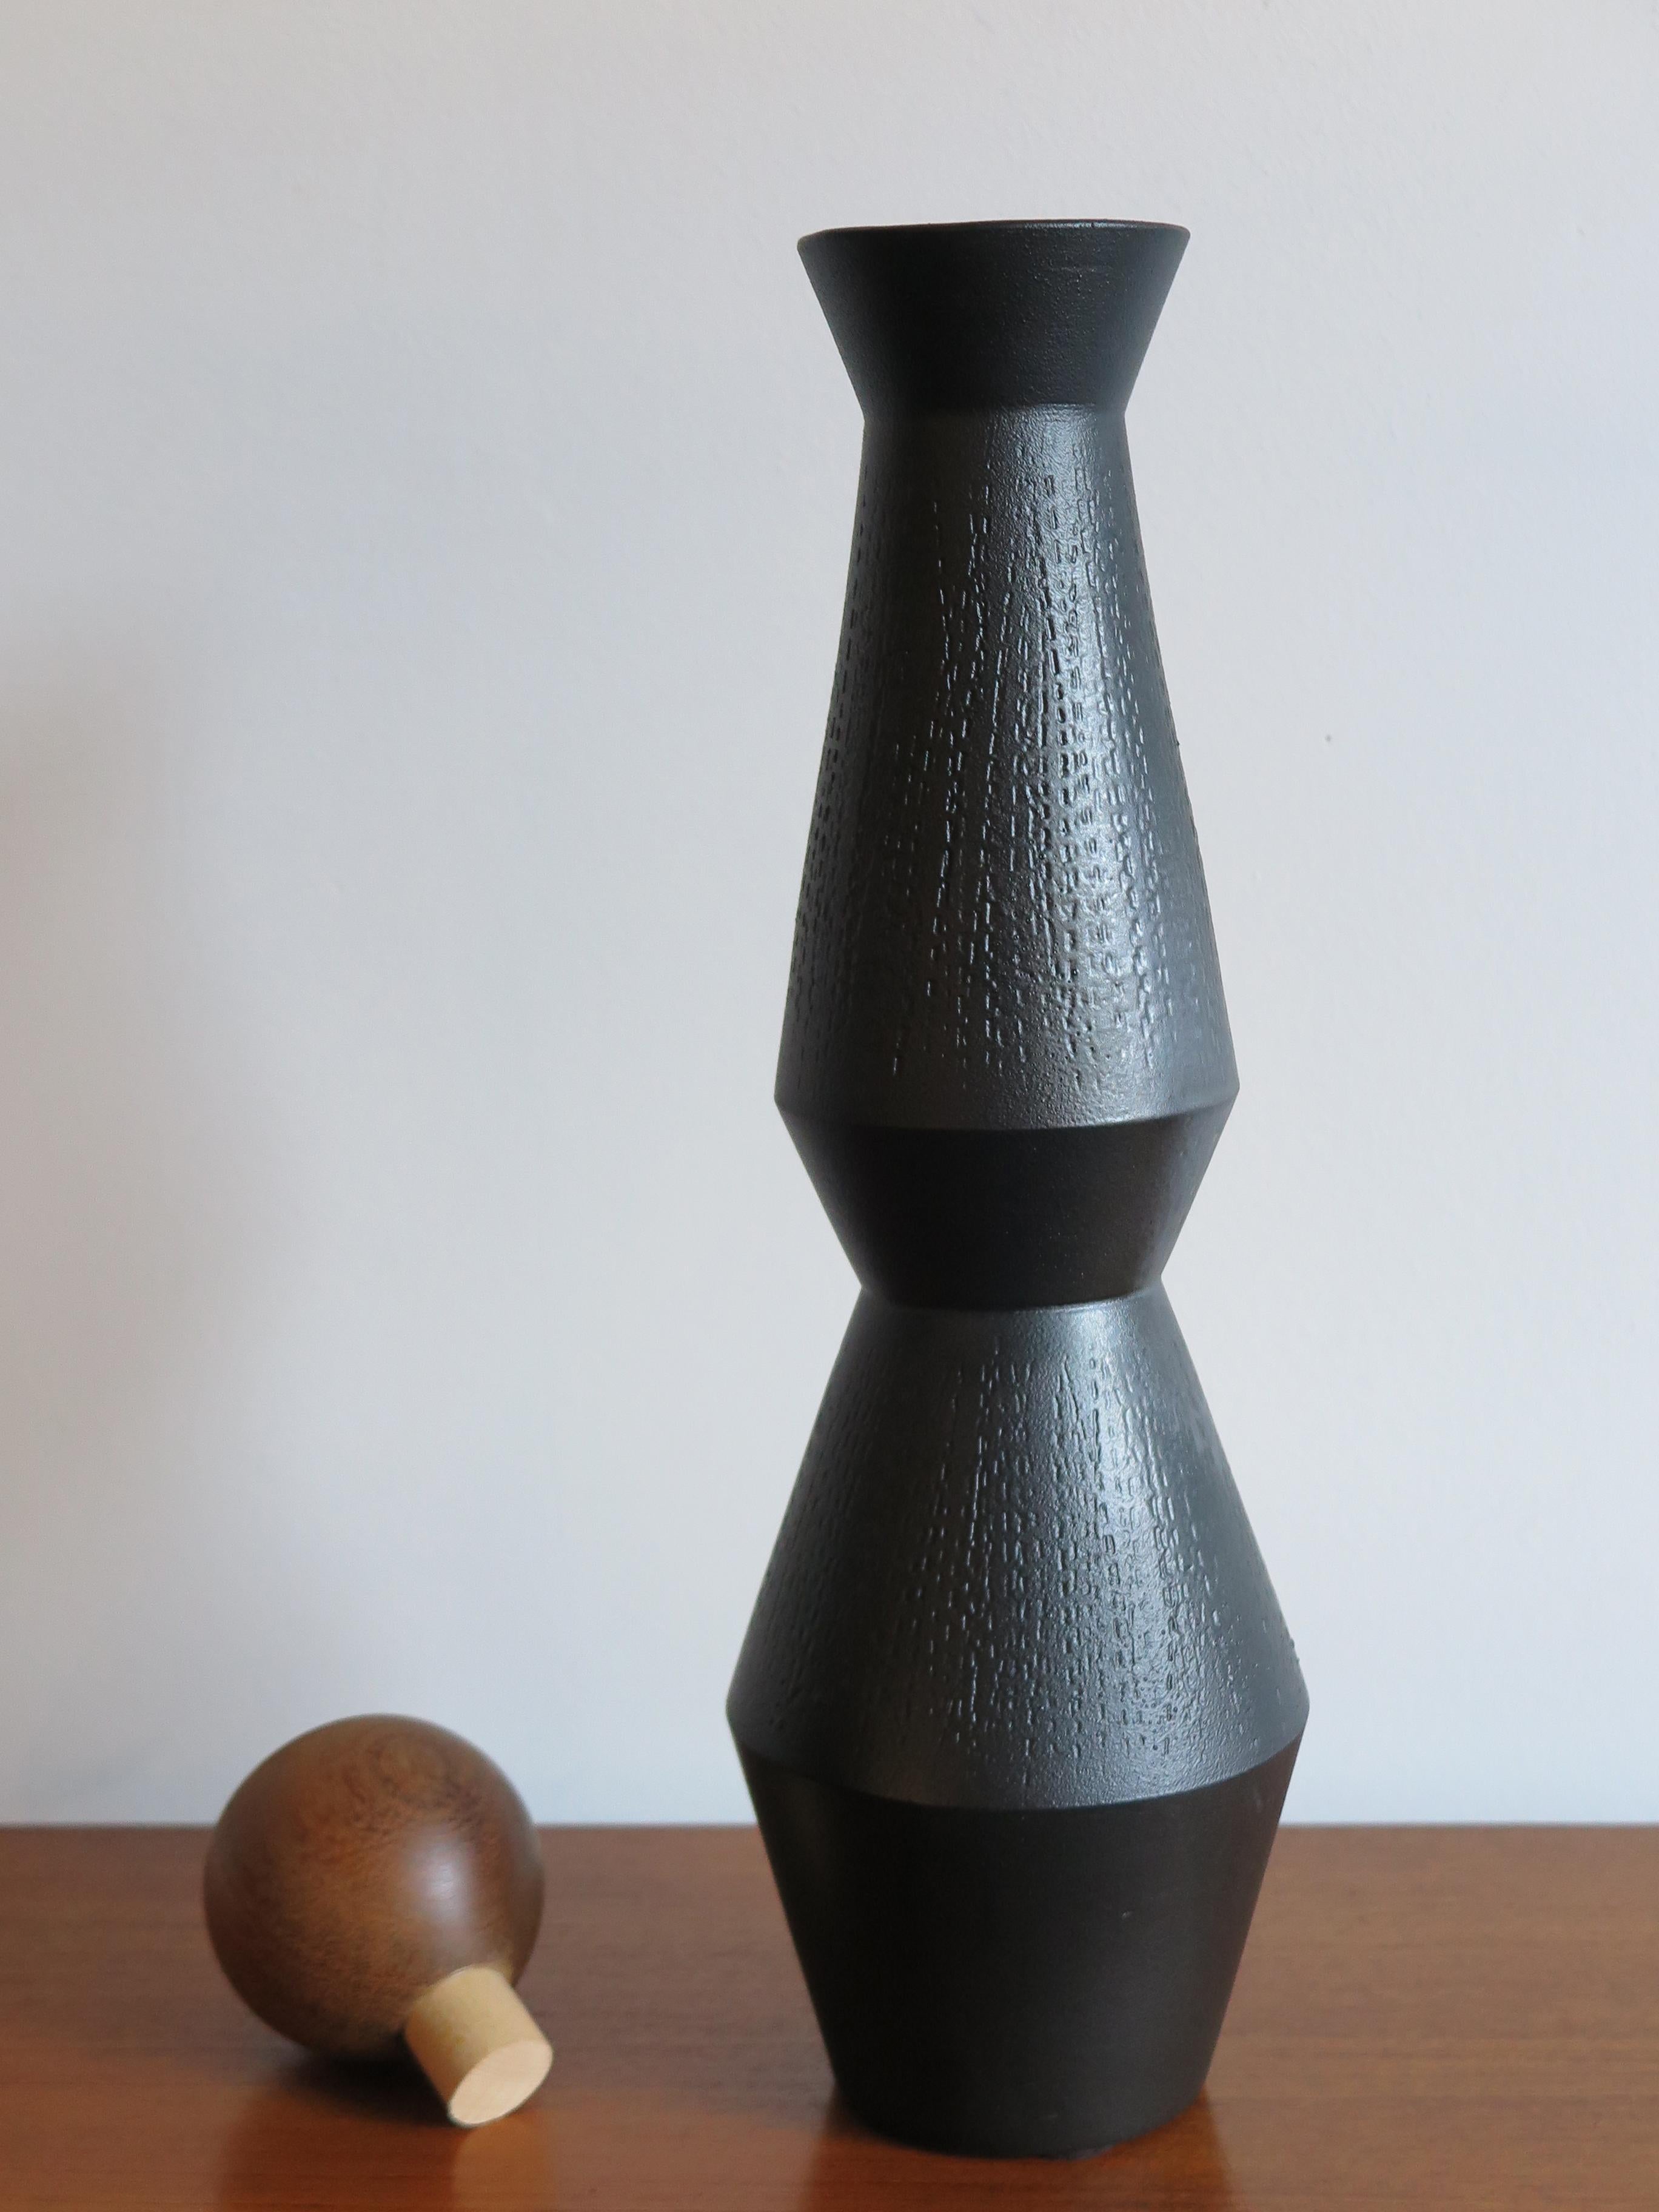 Contemporary ceramic vase turned and hand-engraved with matt black enamel, wooden hood to choose from in 2 variants, new design by Capperidicasa, made in Italy.

Dimensions: Diameter 15 cm, height without cap 49 cm, height with cap 55 cm.
 